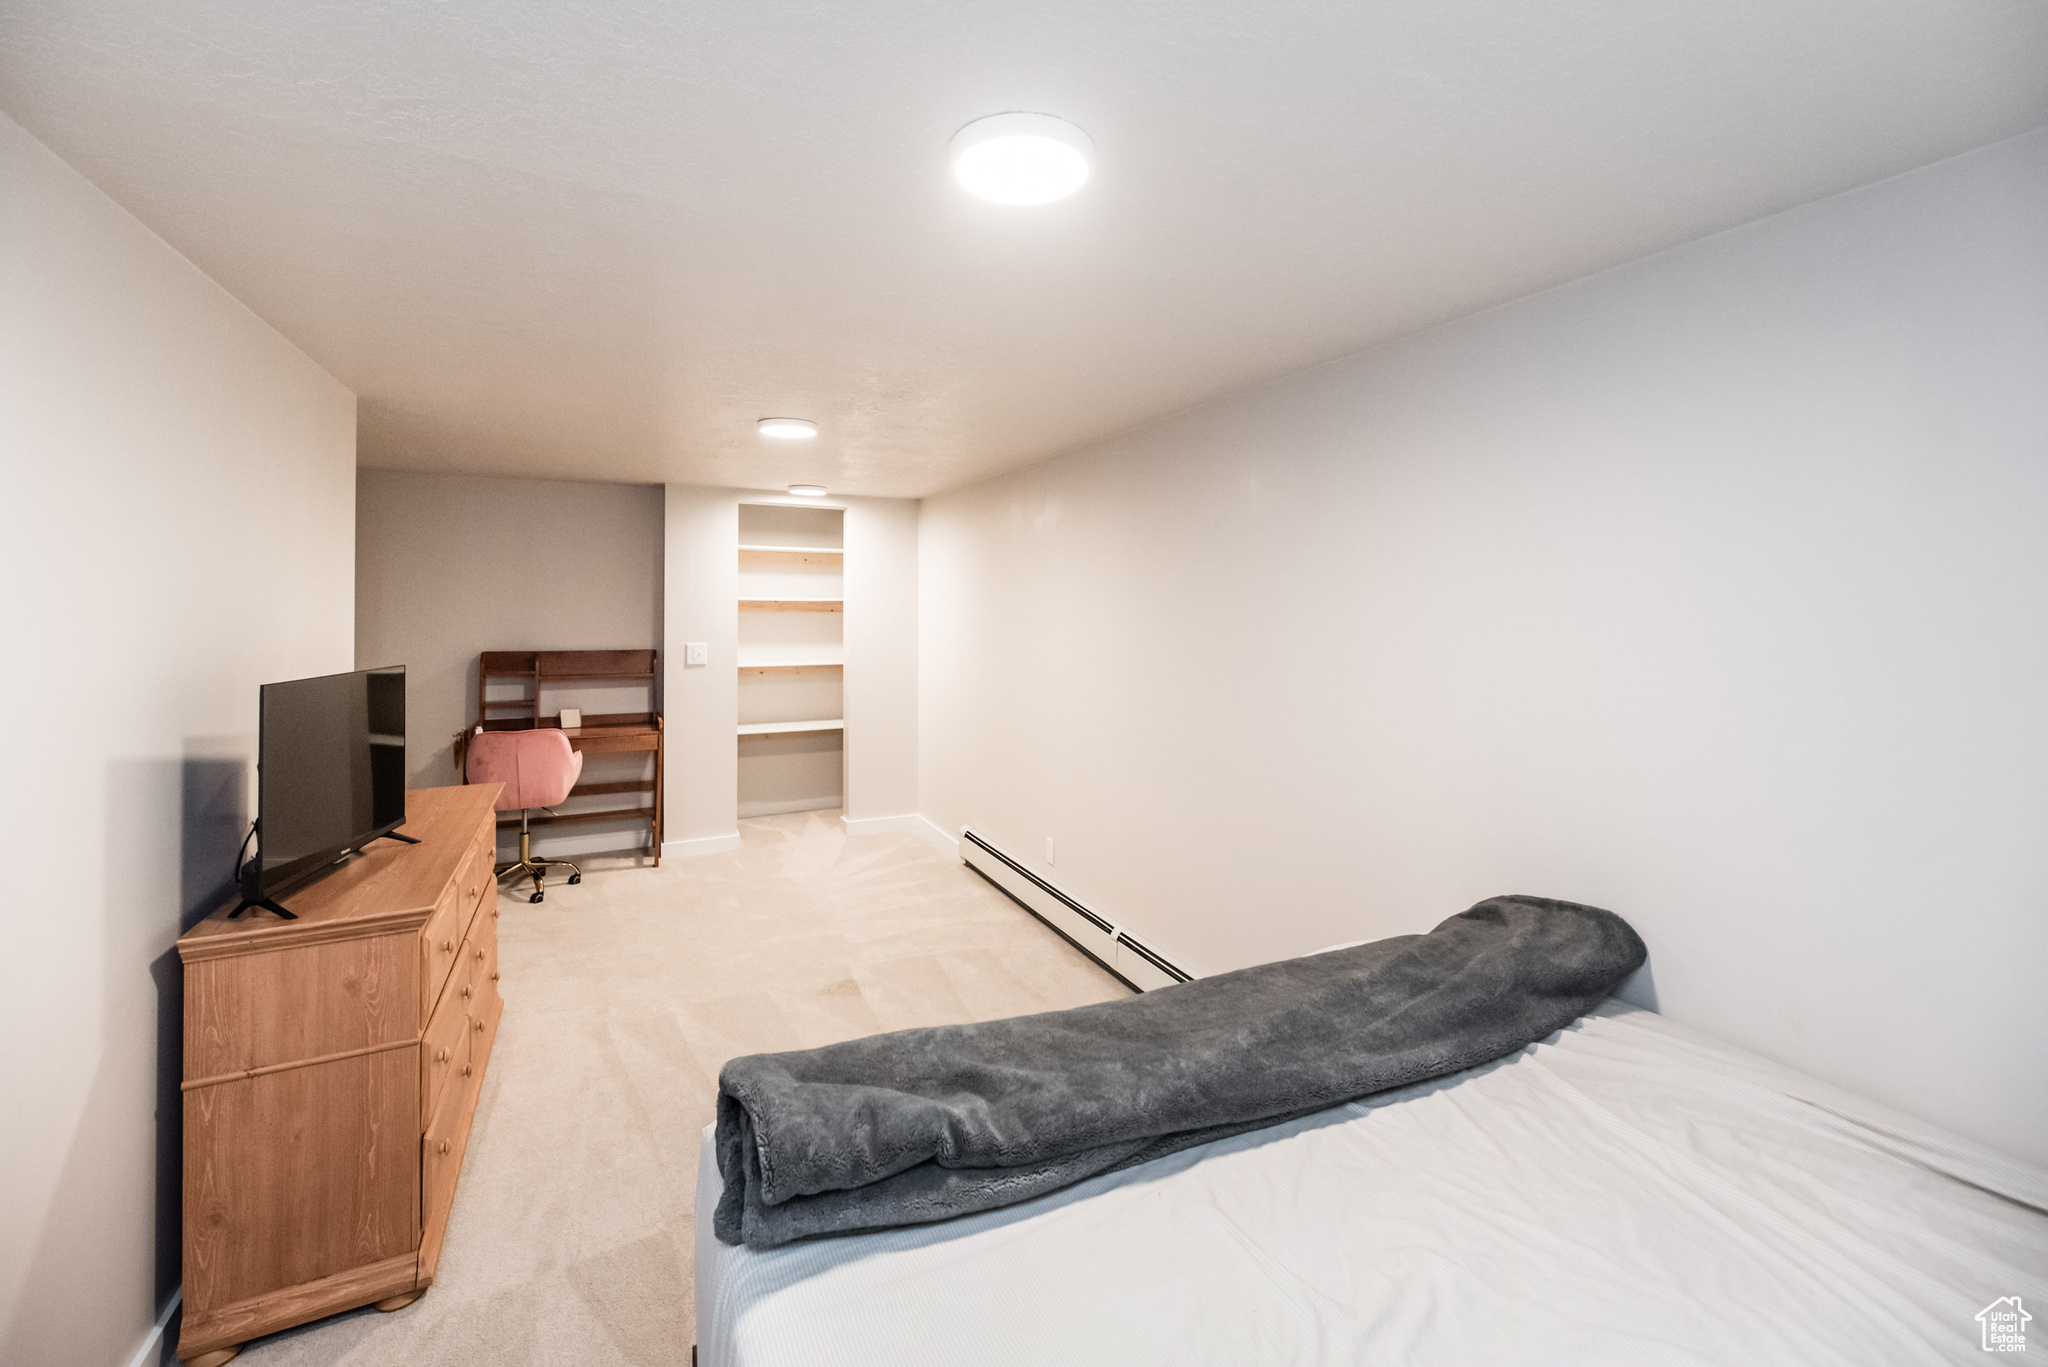 Bedroom with a walk in closet, light carpet, and baseboard heating